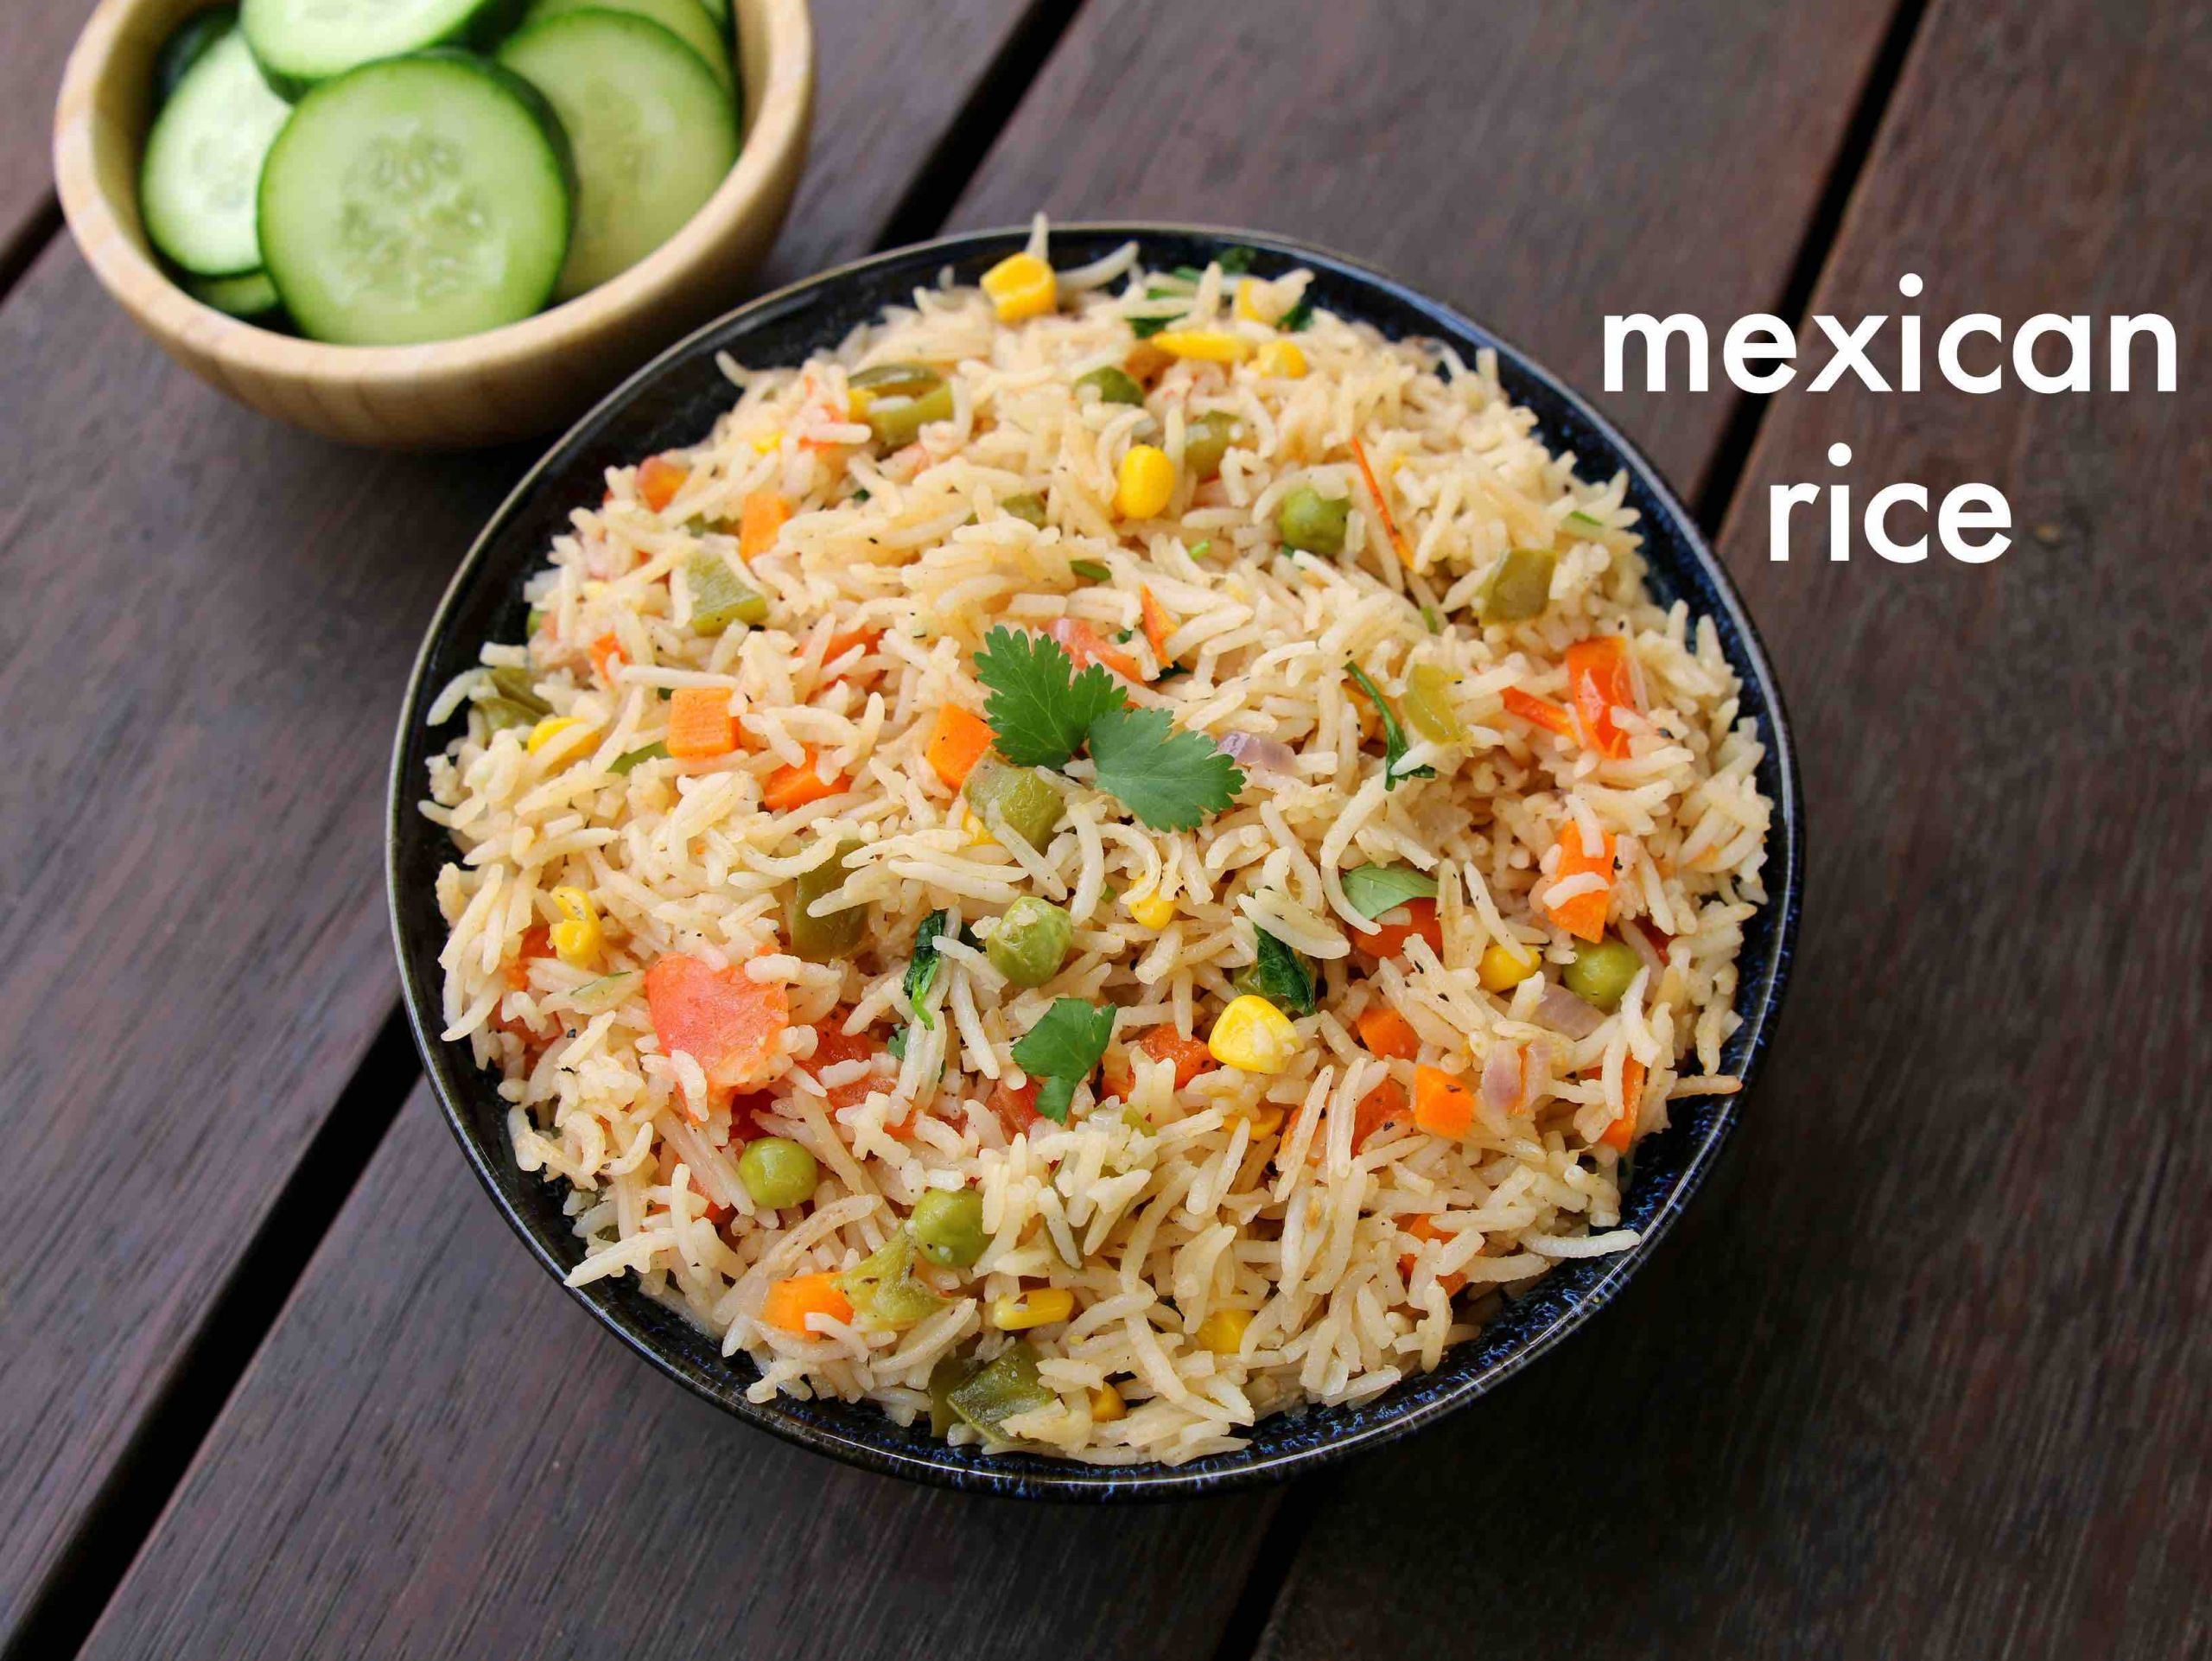 Authentic Mexican Restaurant Rice Recipe
 mexican rice recipe